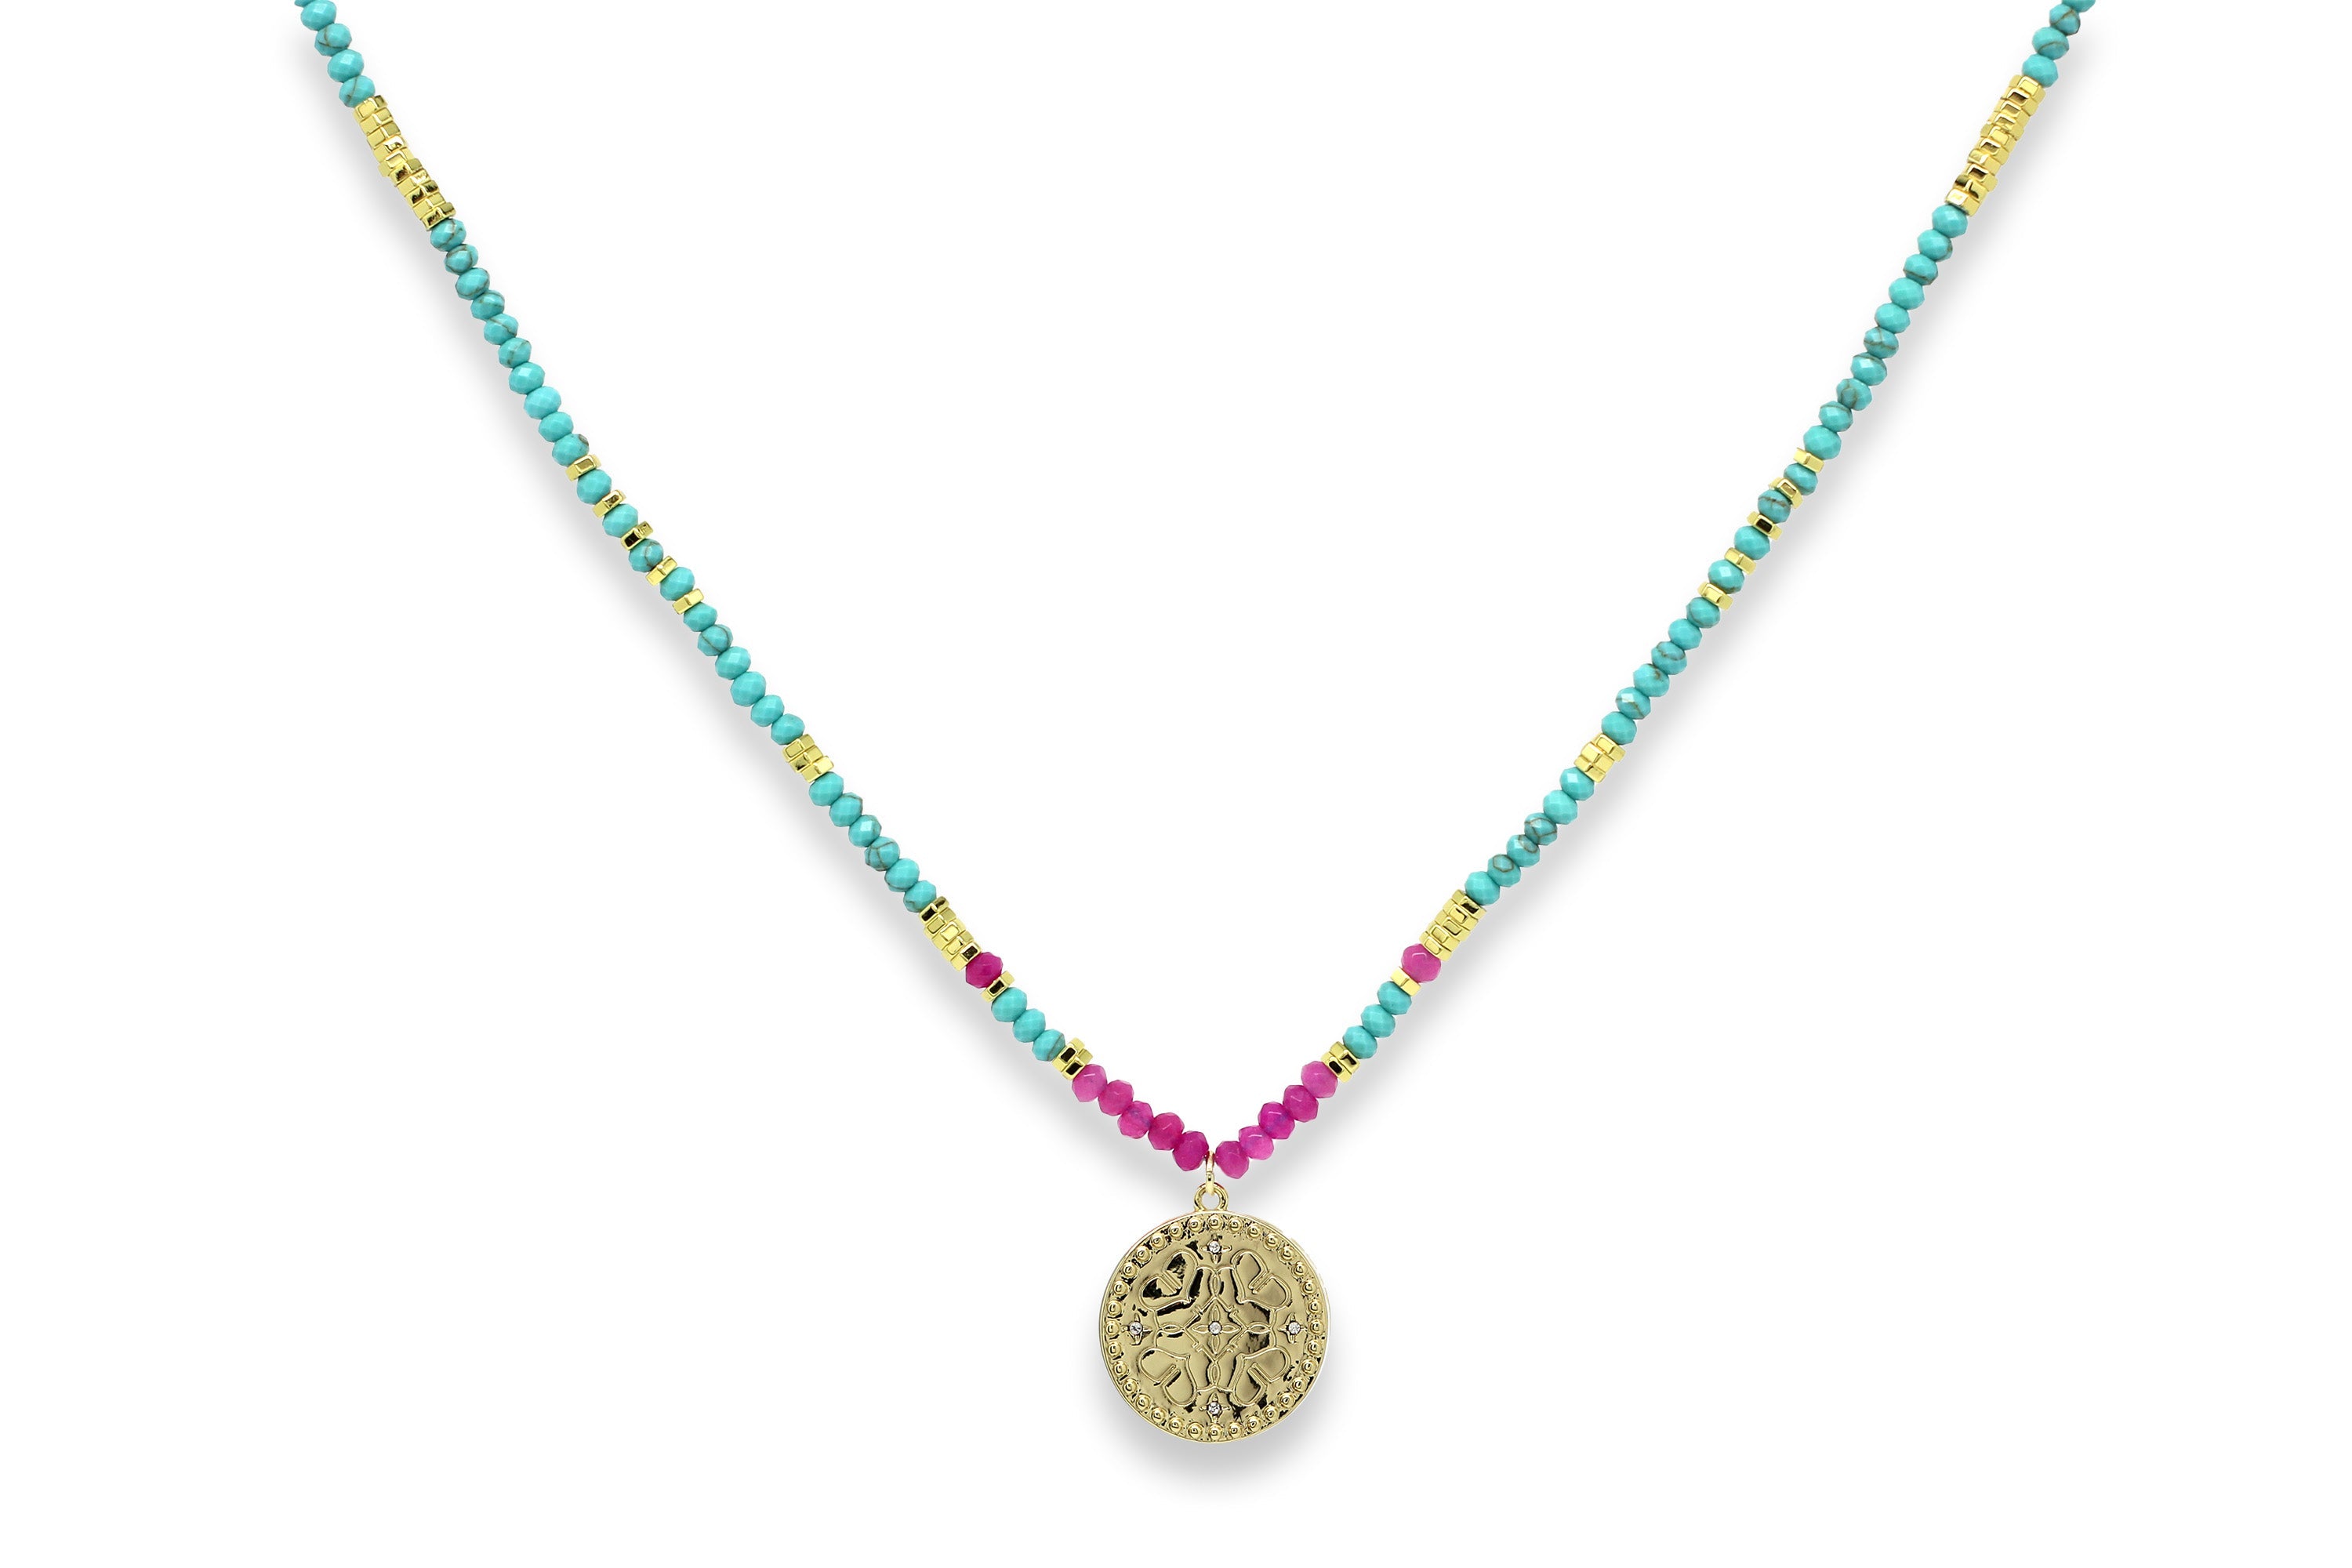 Odin Turquoise & Pink Pendant Necklace